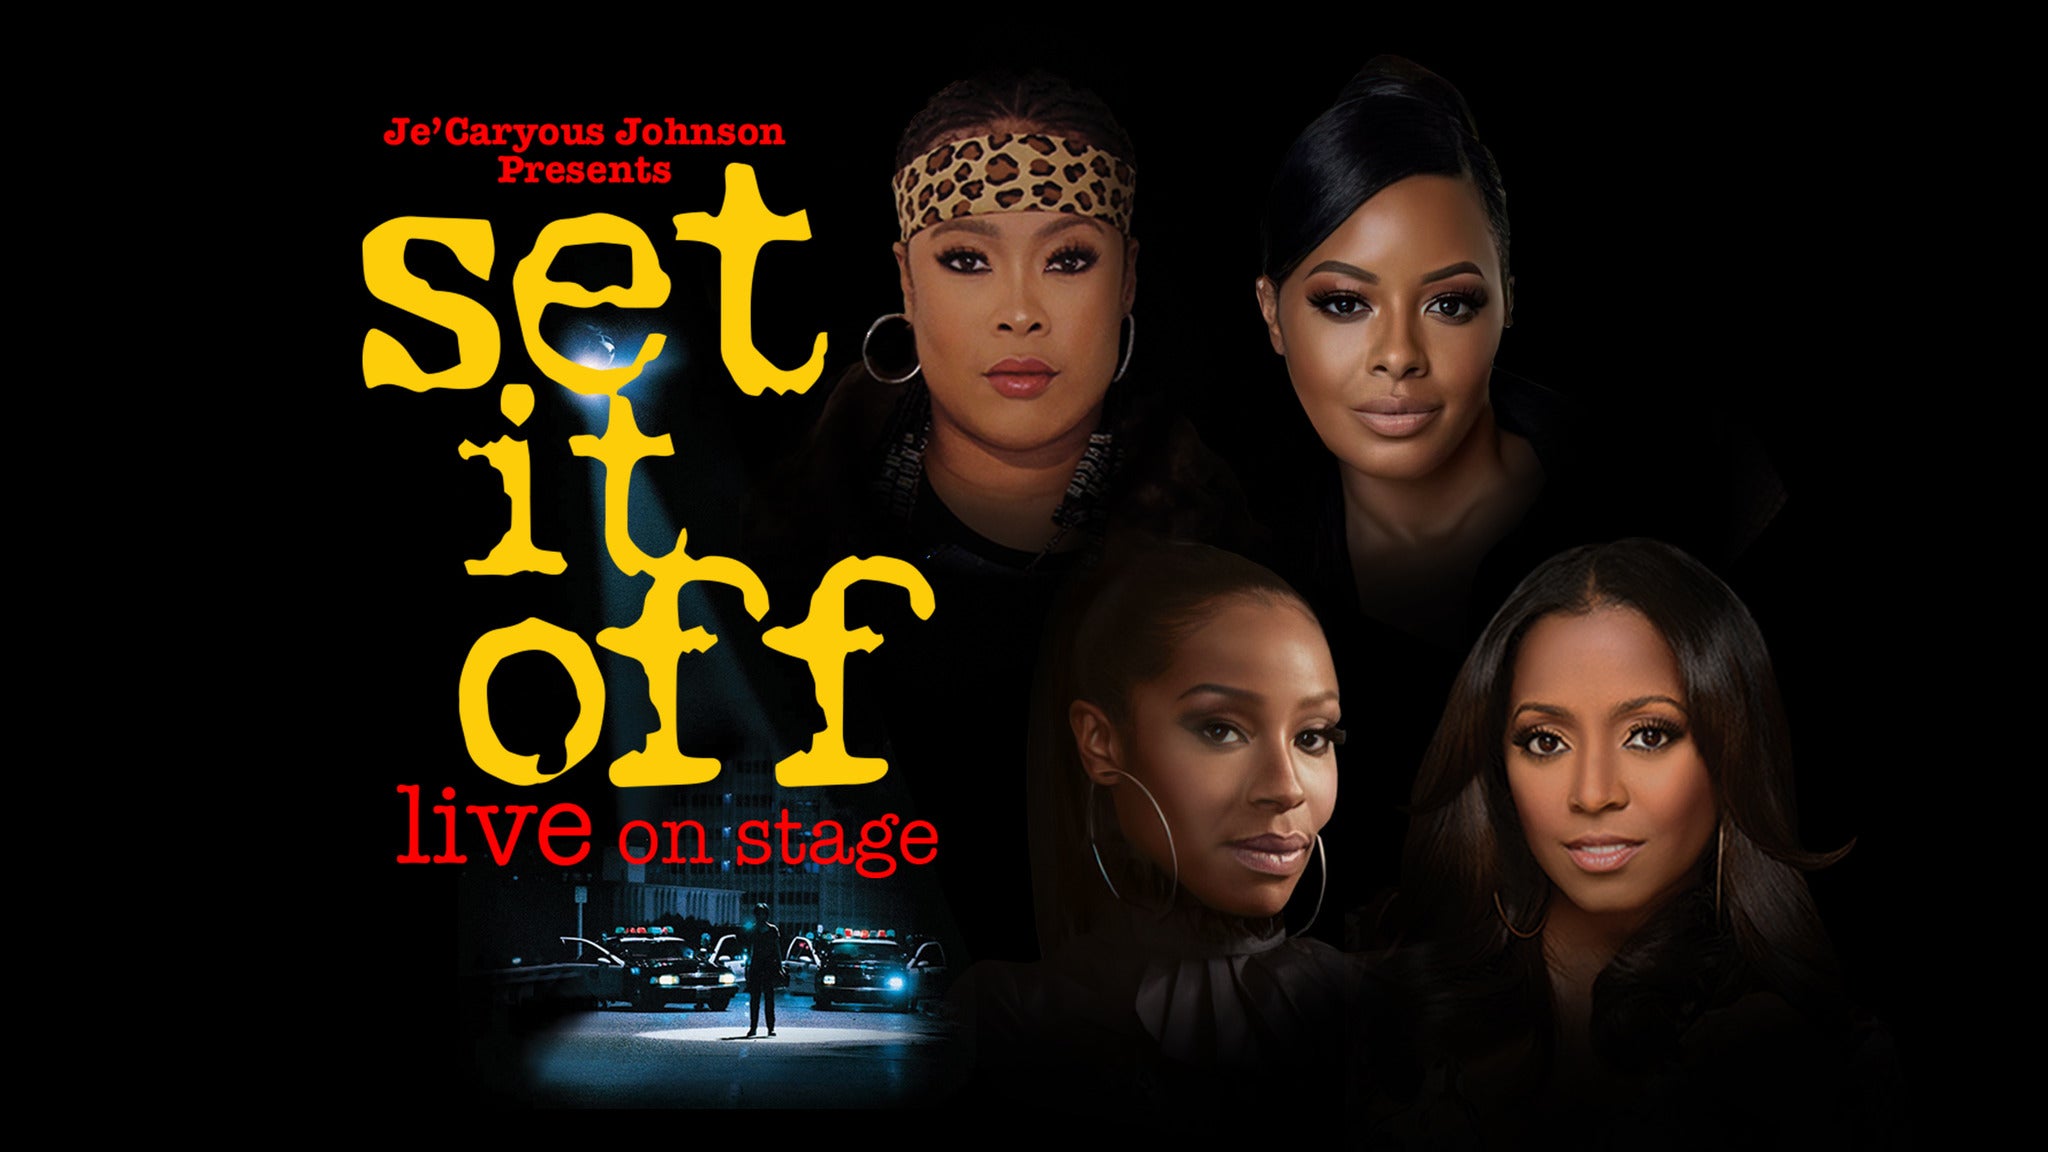 Je'Caryous Johnson Presents "Set It Off" in Memphis promo photo for Exclusive presale offer code